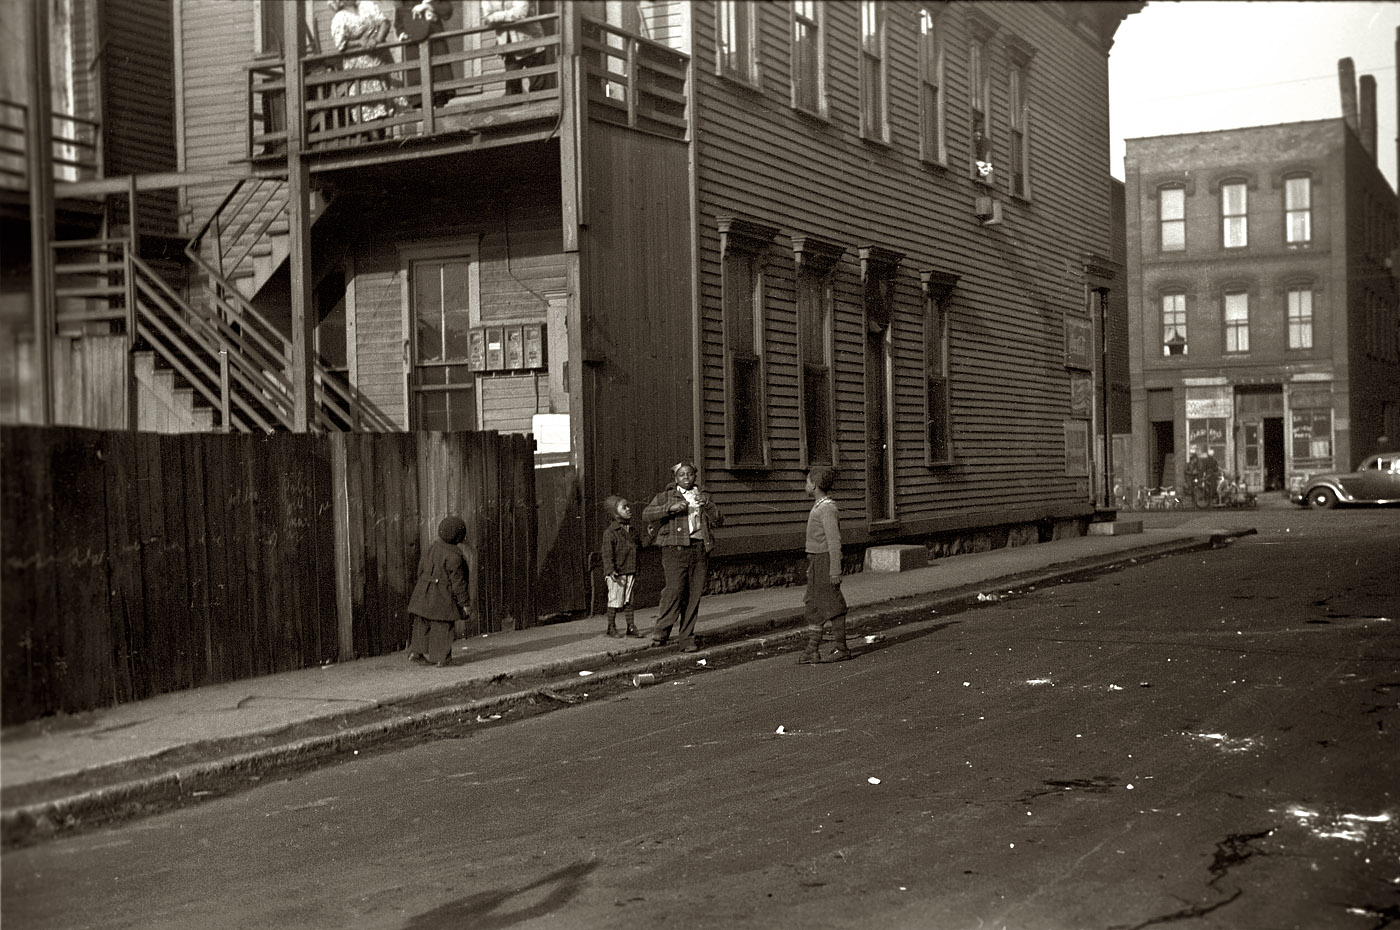 April 1941. Street scene in the Black Belt, South Side Chicago. View full size. 35mm nitrate negative by Edwin Rosskam for the Farm Security Administration.